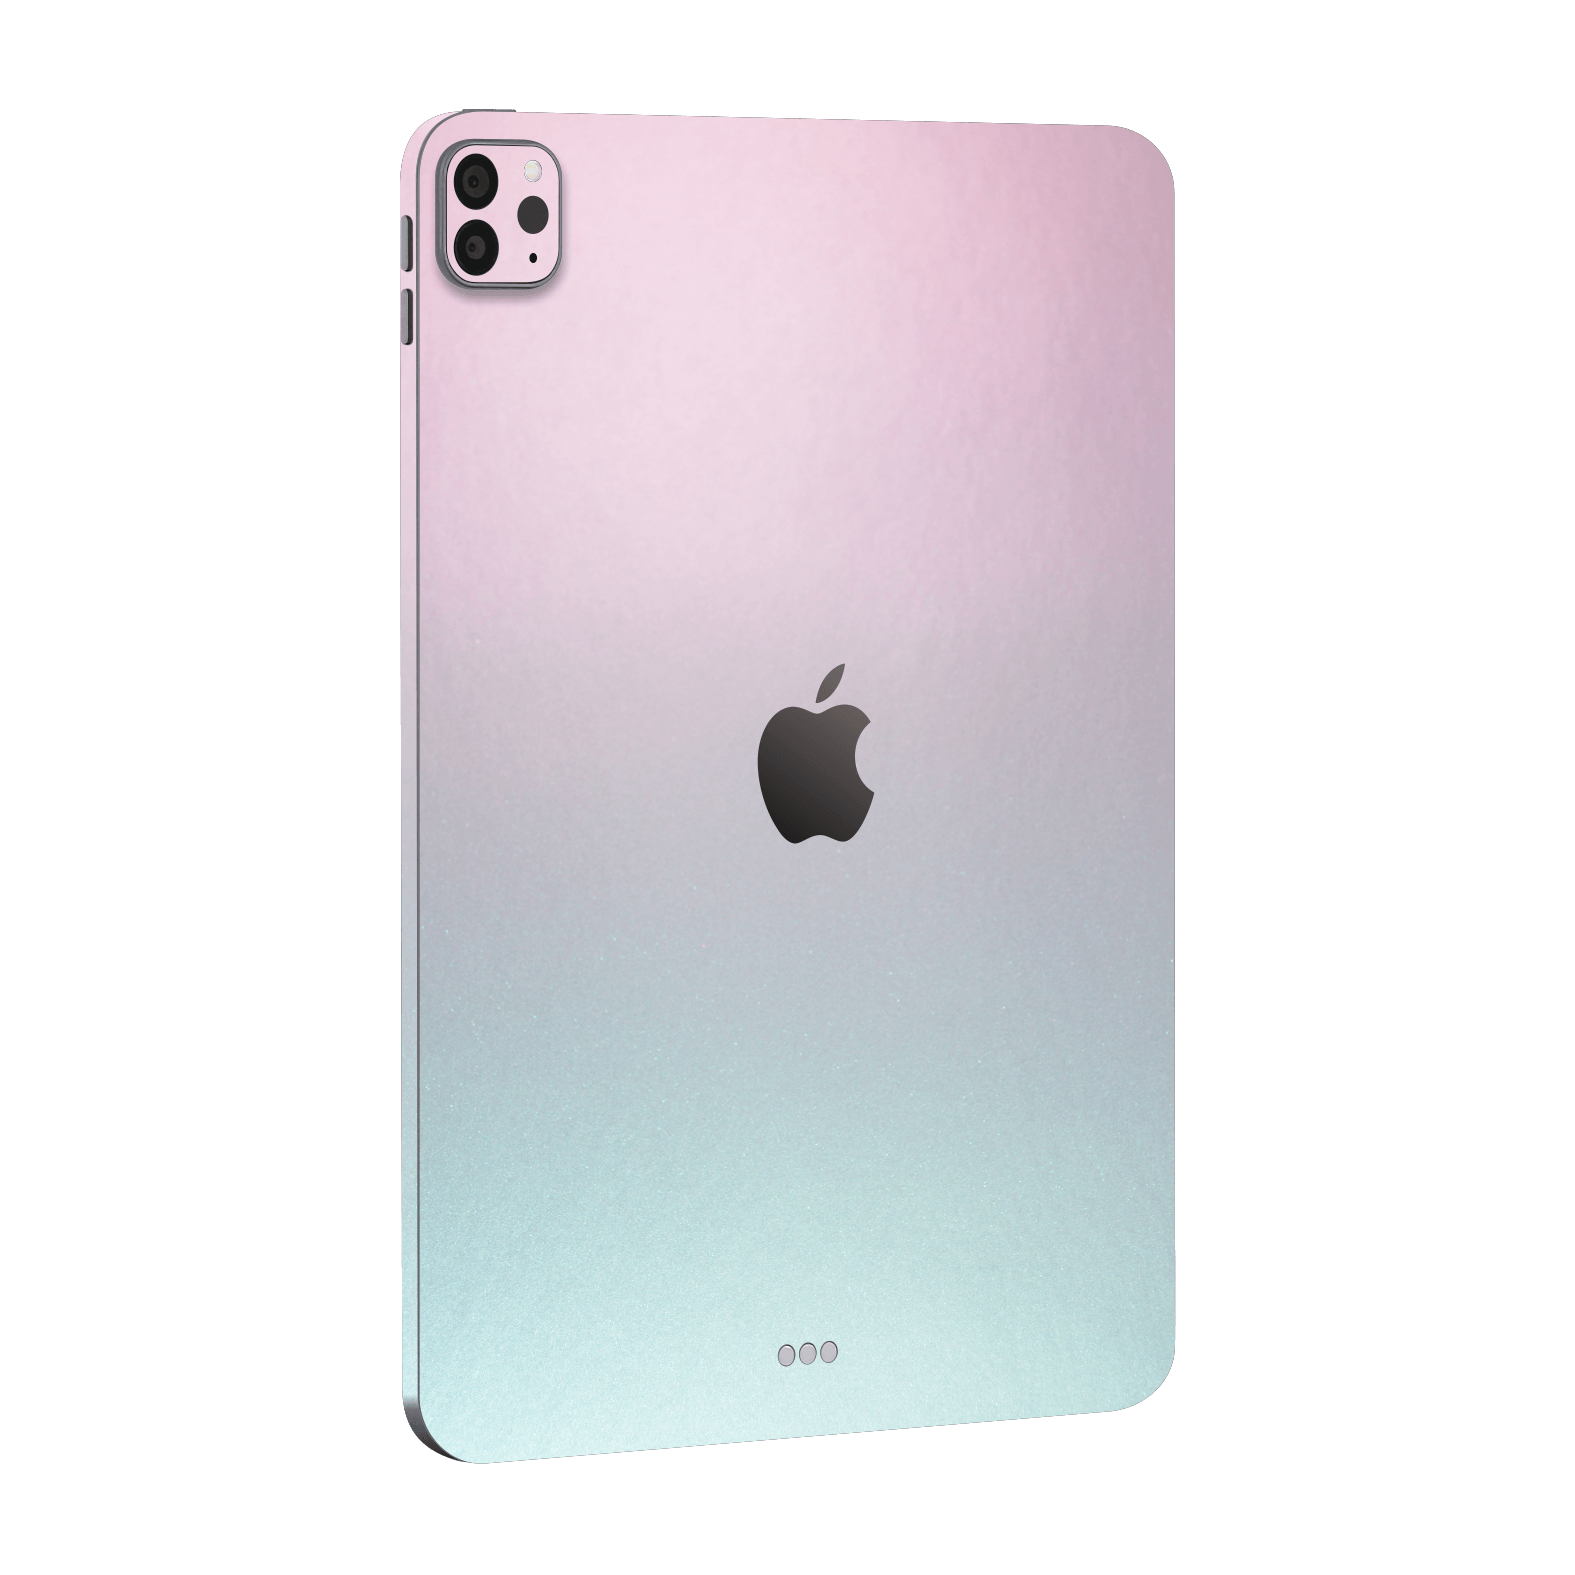 iPad PRO 11" (2021) Chameleon Amethyst Colour-changing Metallic Skin Wrap Sticker Decal Cover Protector by EasySkinz | EasySkinz.com